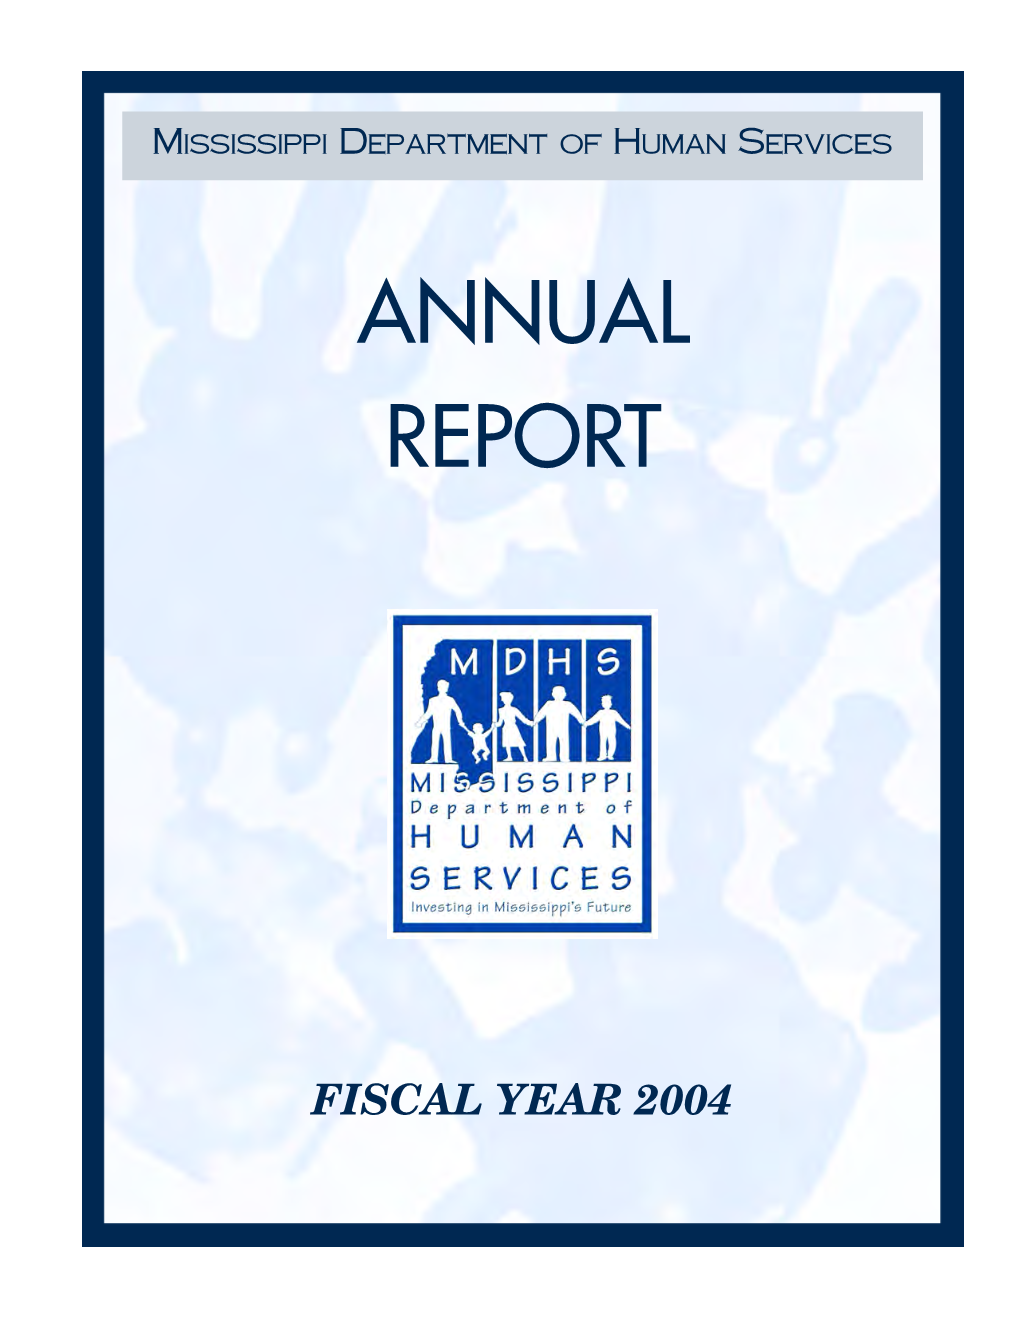 MDHS SFY 2004 Annual Report